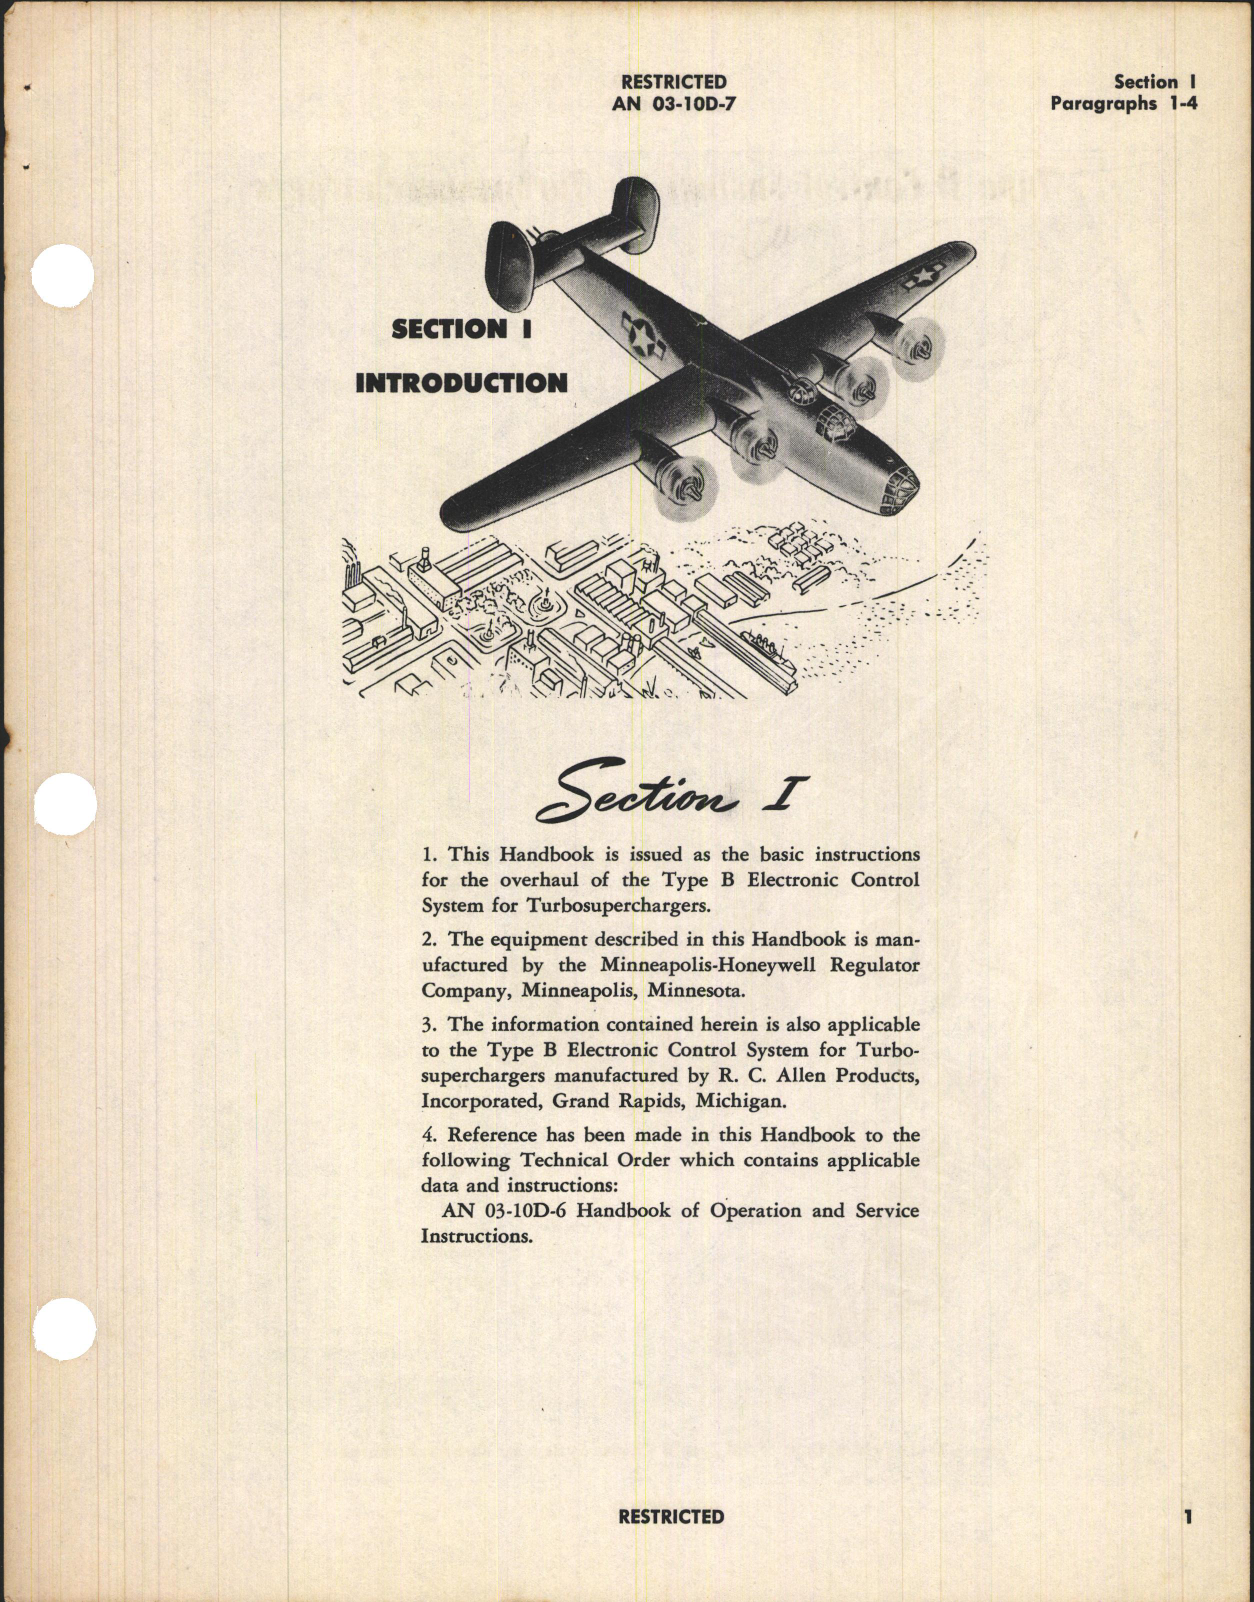 Sample page 5 from AirCorps Library document: Overhaul Instructions with Parts Catalog for Type B Electronic Control System (Turbosupercharger Regulator)